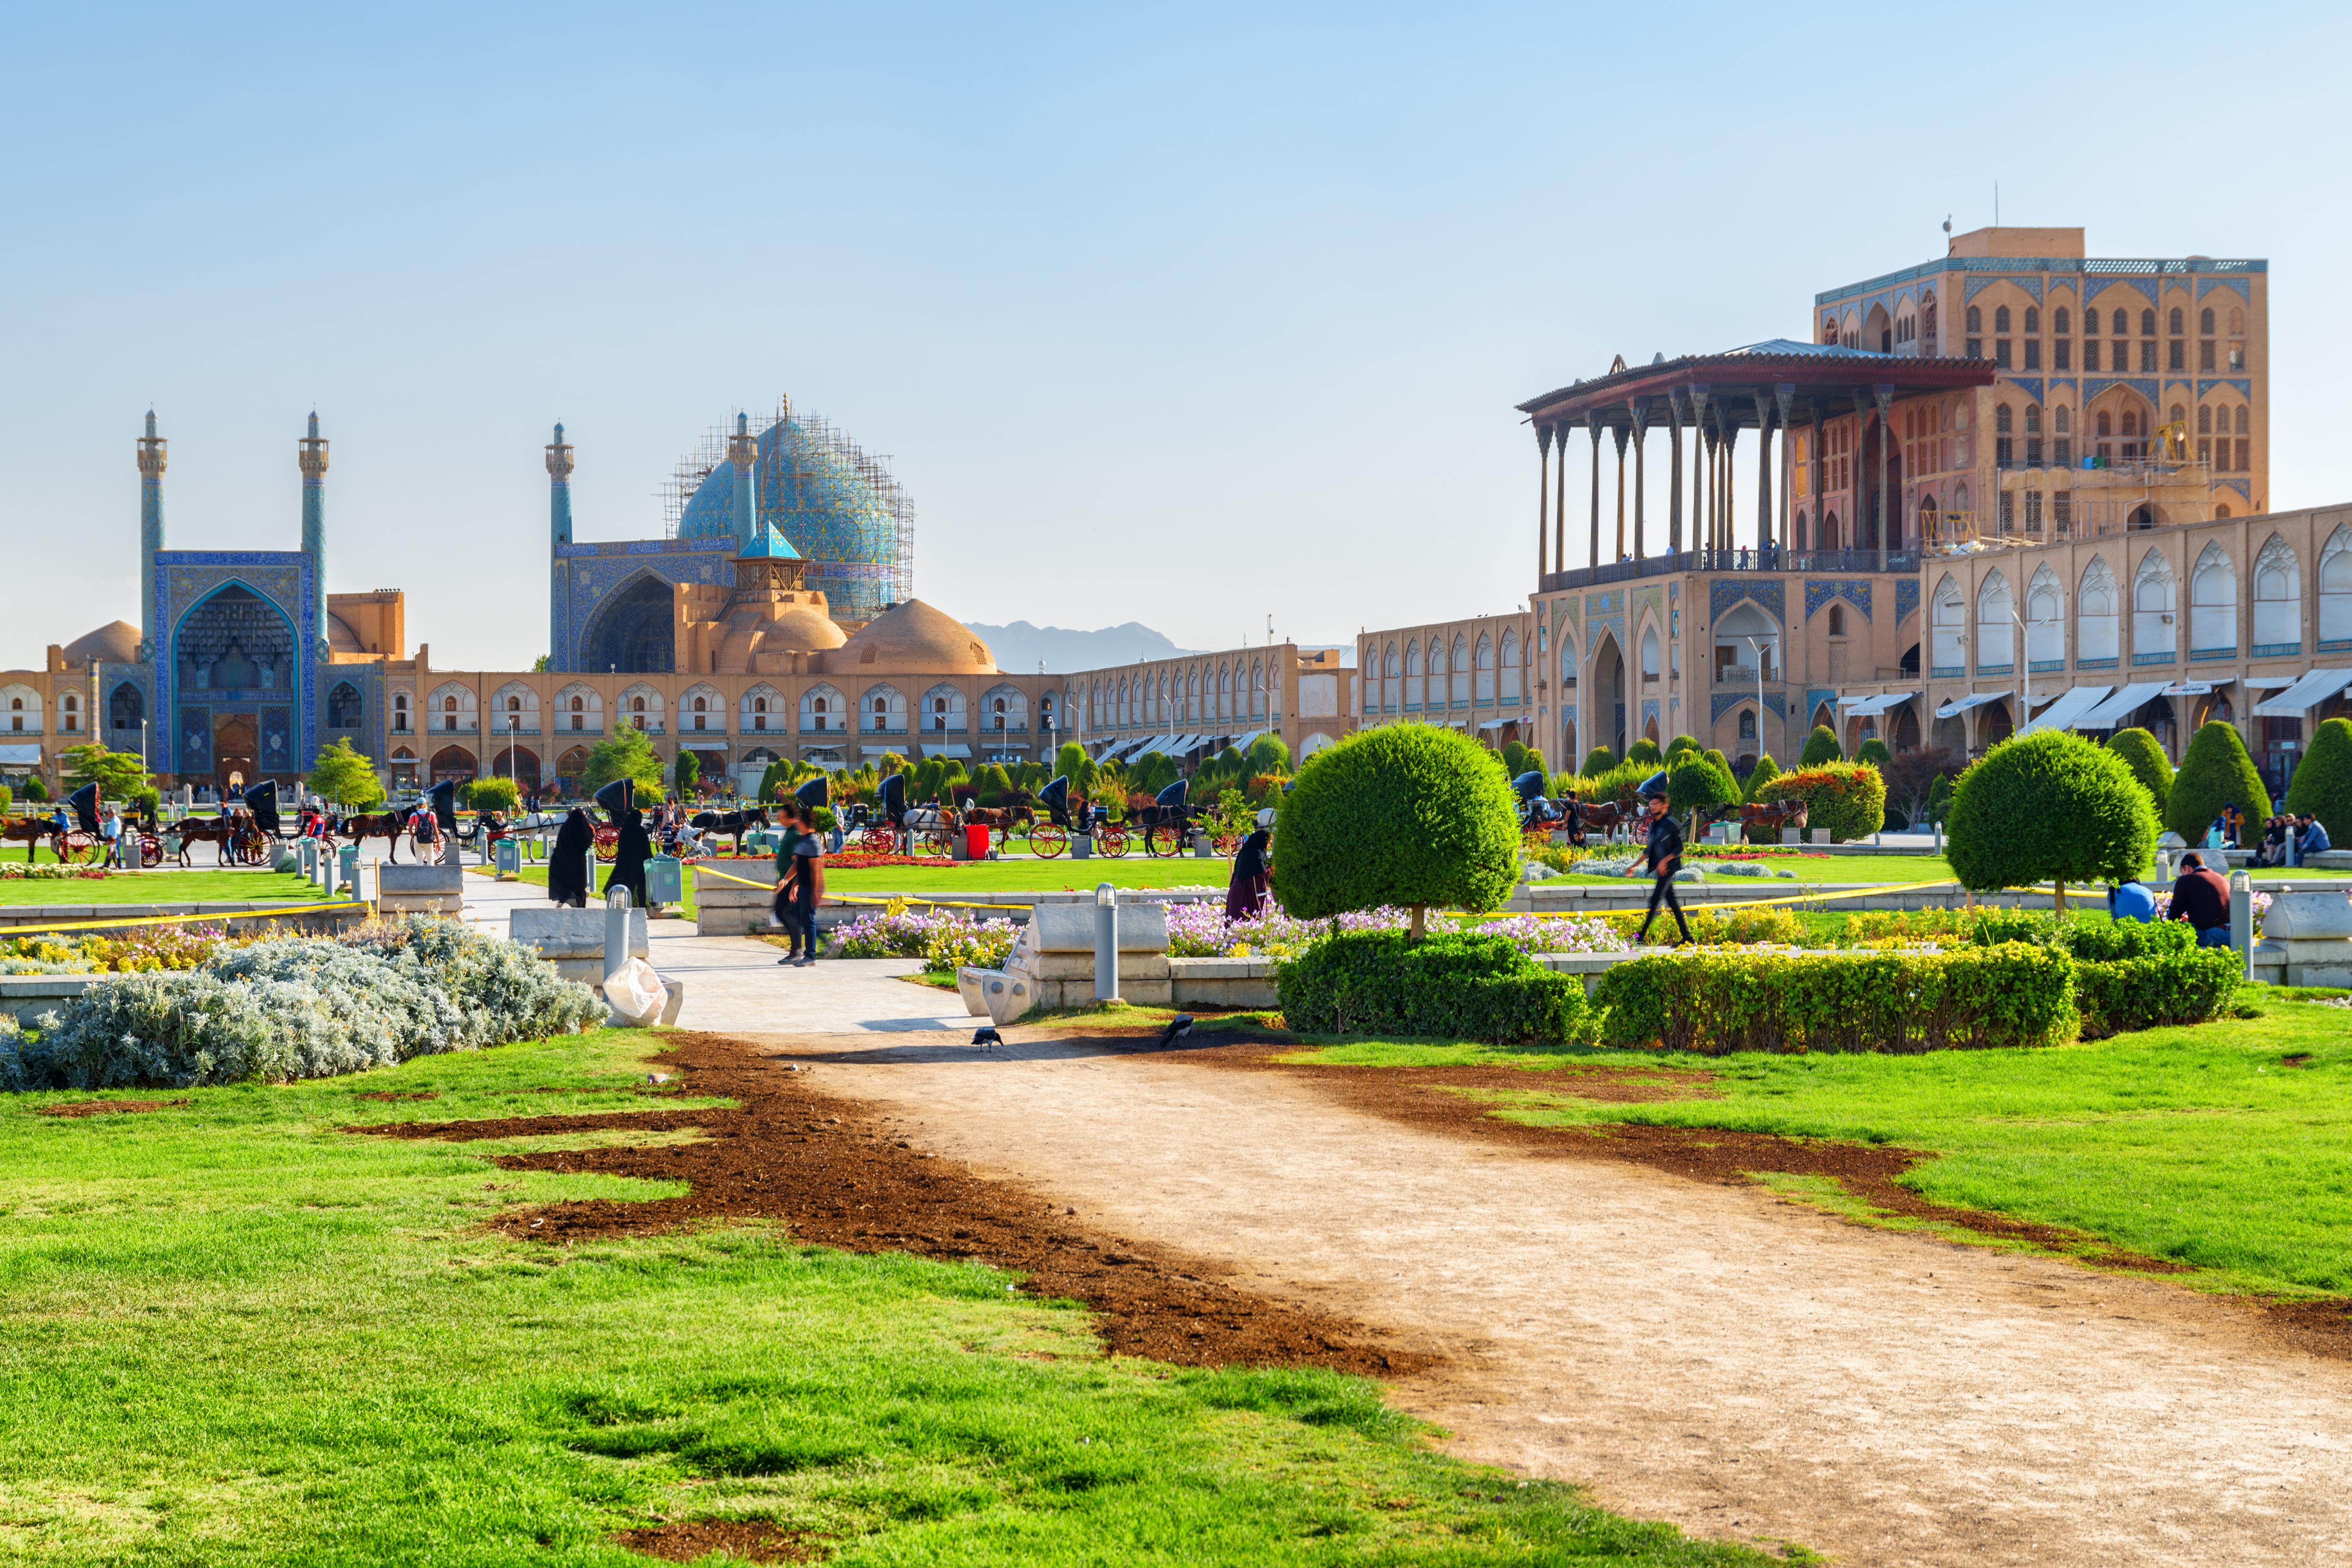 The large square is surrounded by historic sites including the impressive Ali Qapu Palace © Efired / Shutterstock